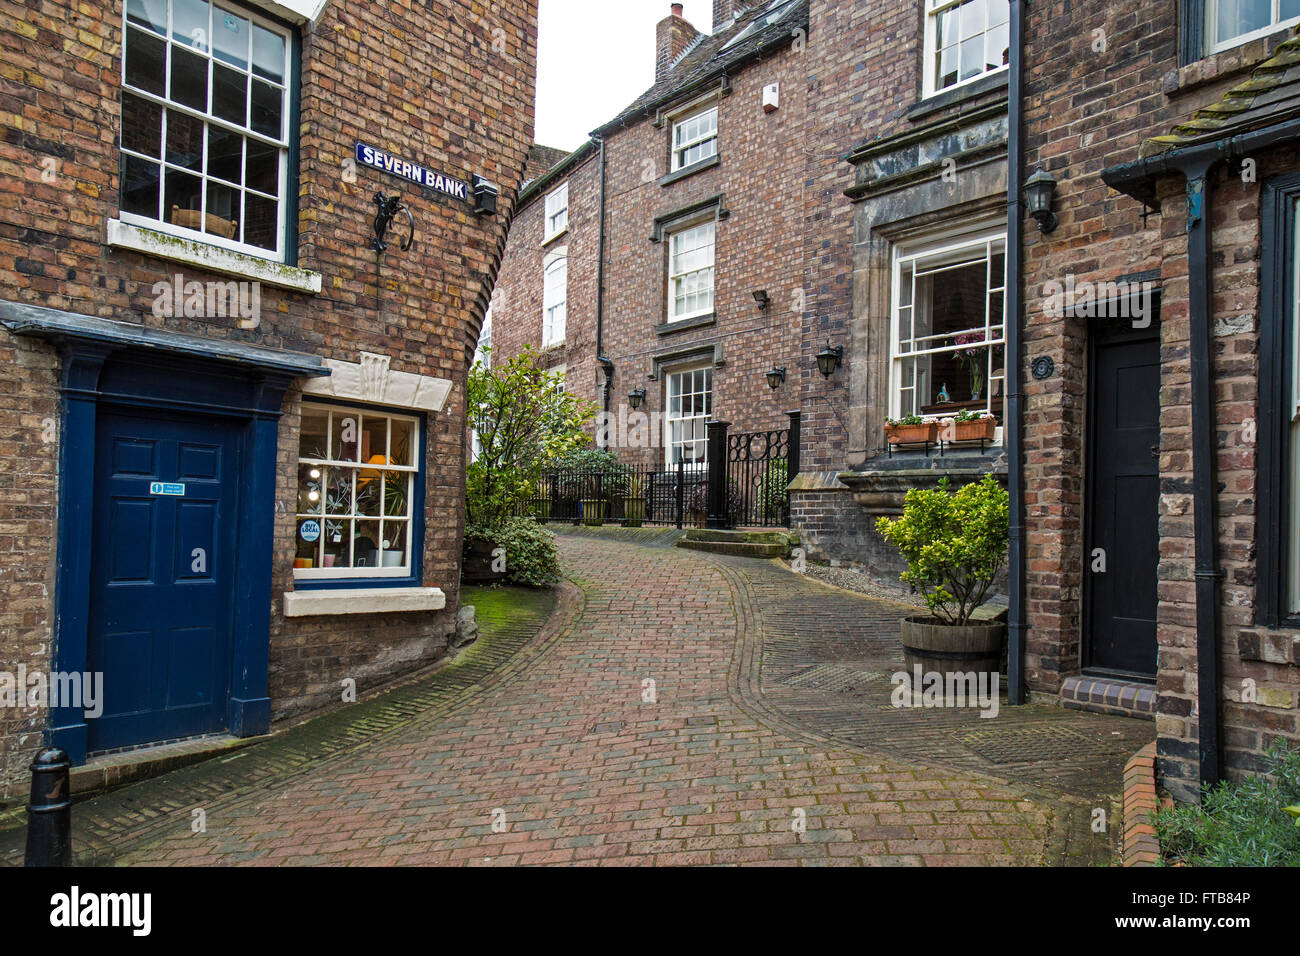 The street known as 'Severn Bank' in Ironbridge, Shropshire, England. Stock Photo